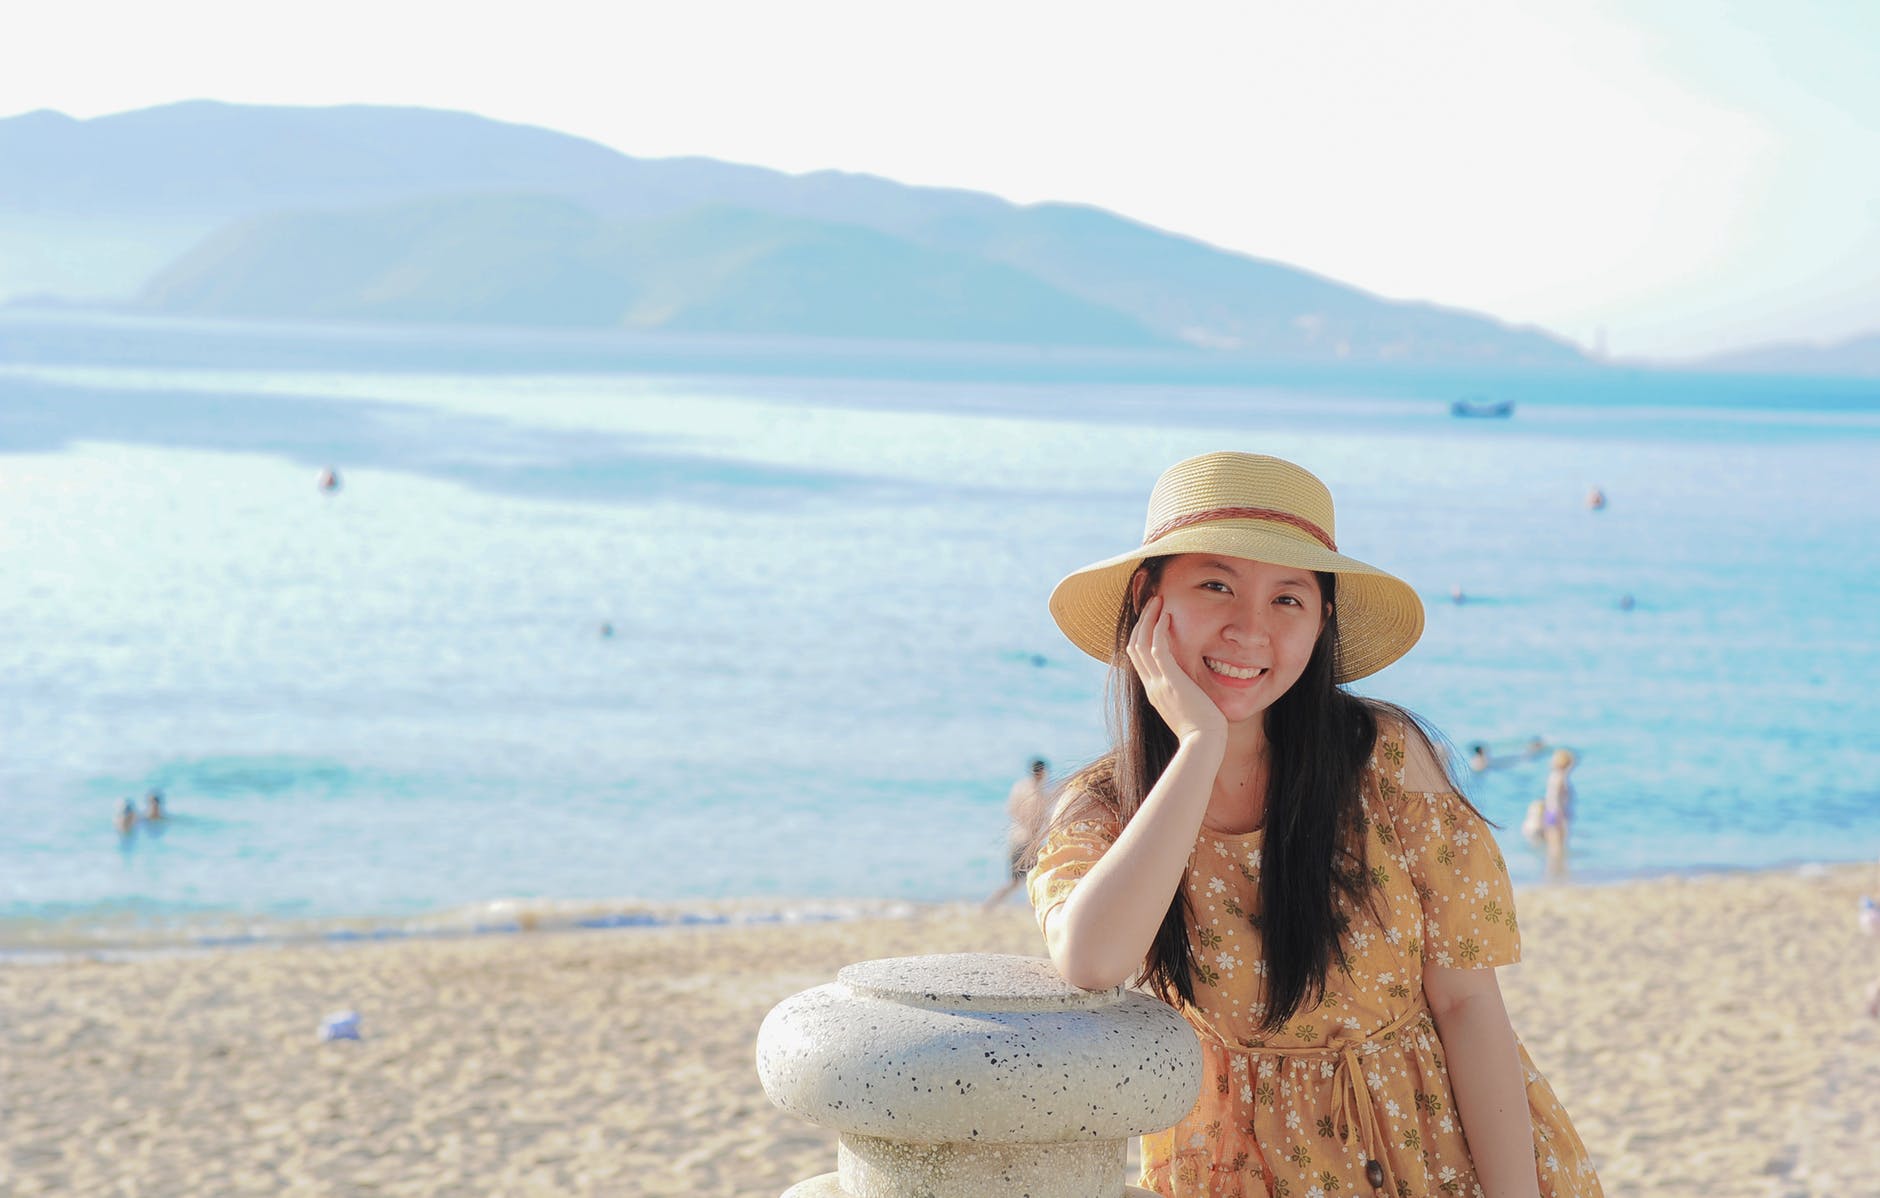 Woman wearing yellow floral dress and sun hat on beach photo